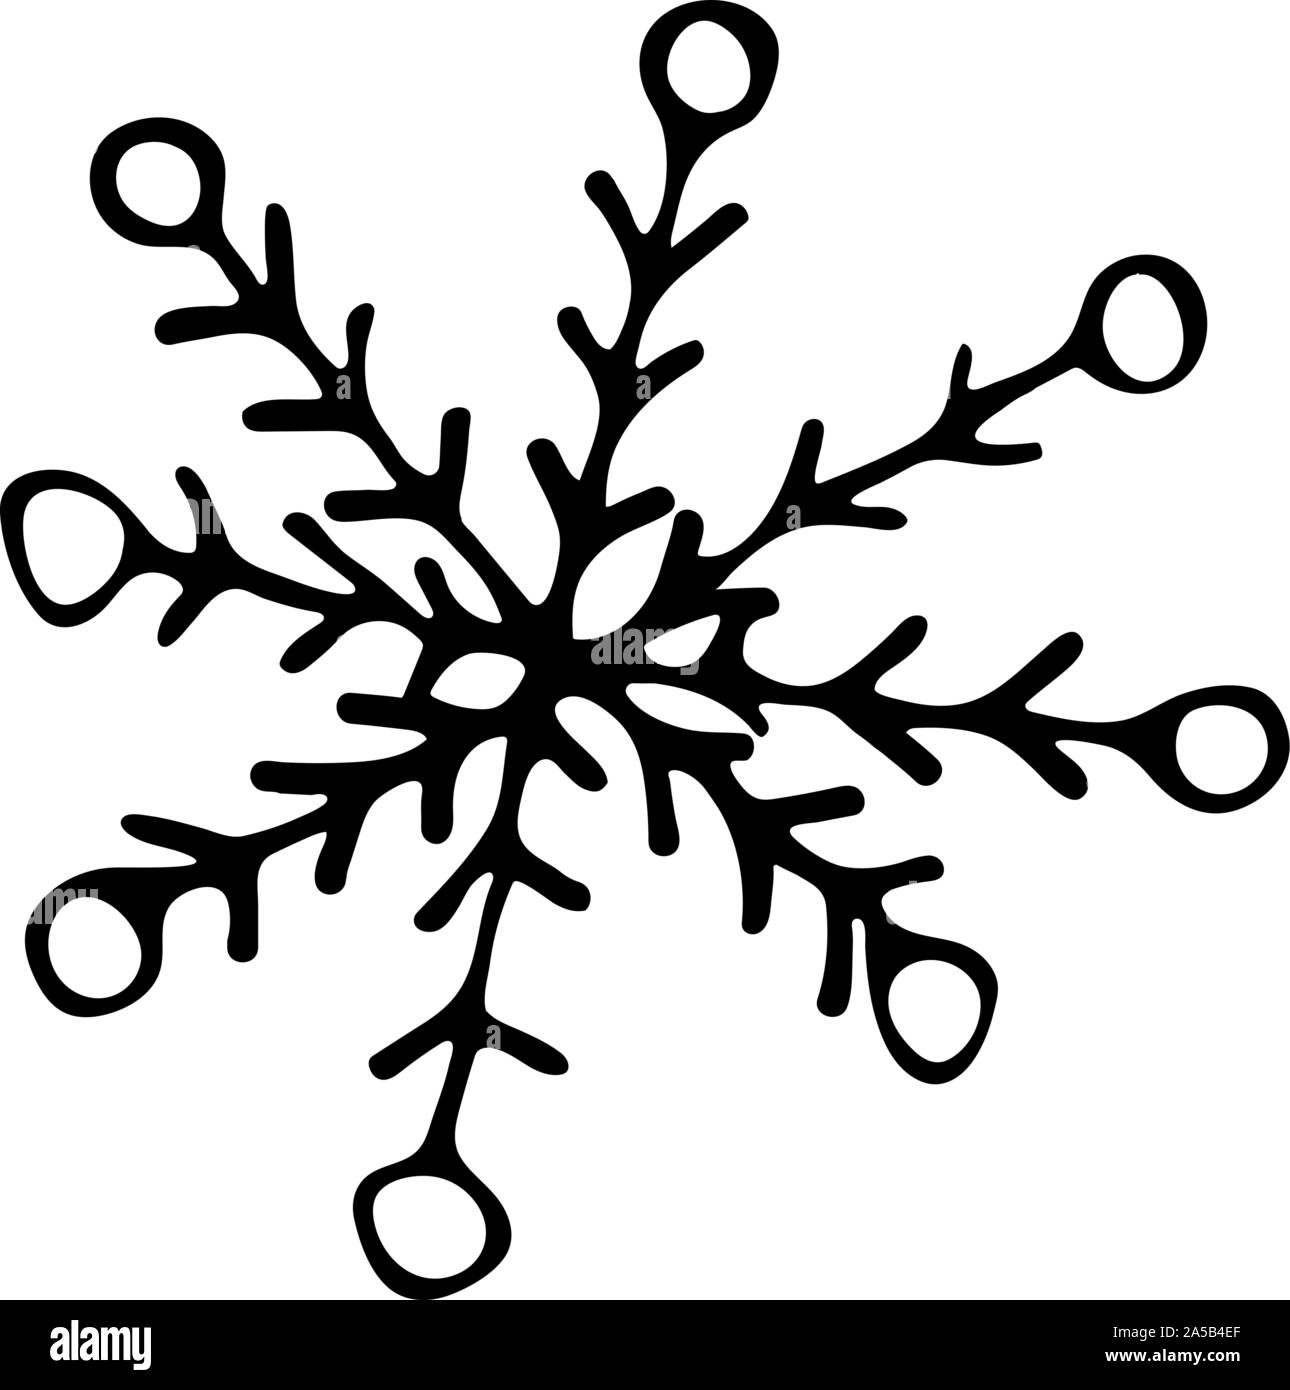 110 White Snowflake Tattoo Designs With Meanings 2023 Icy Winter Ideas